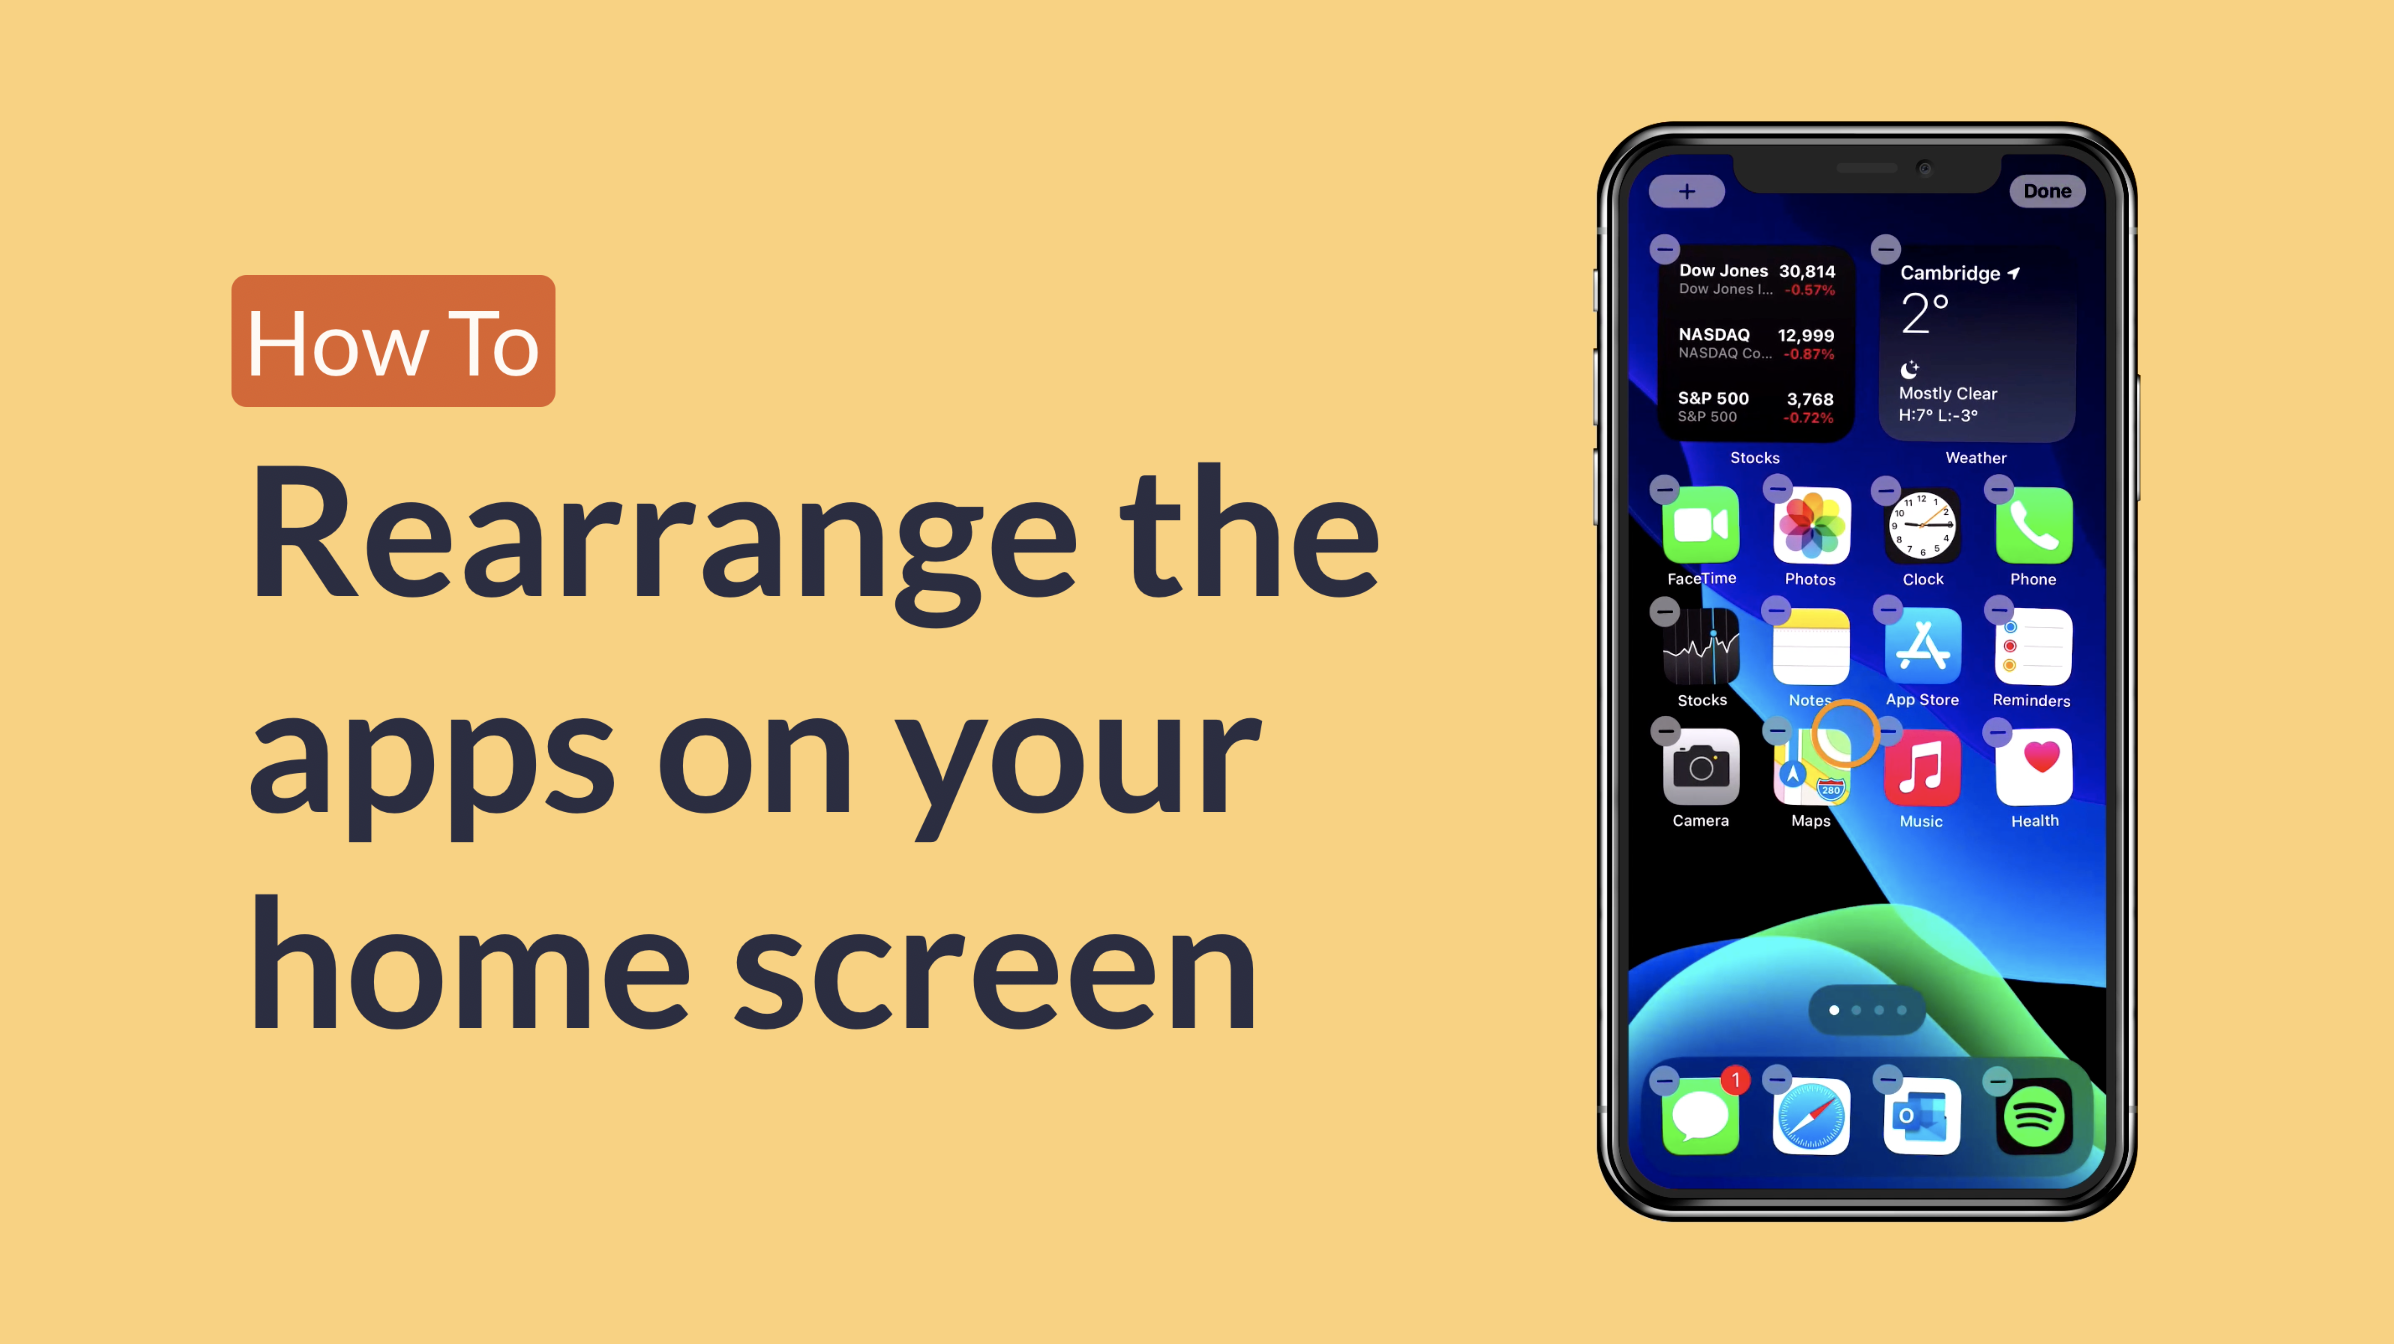 Discover how to rearrange the apps on your home screen